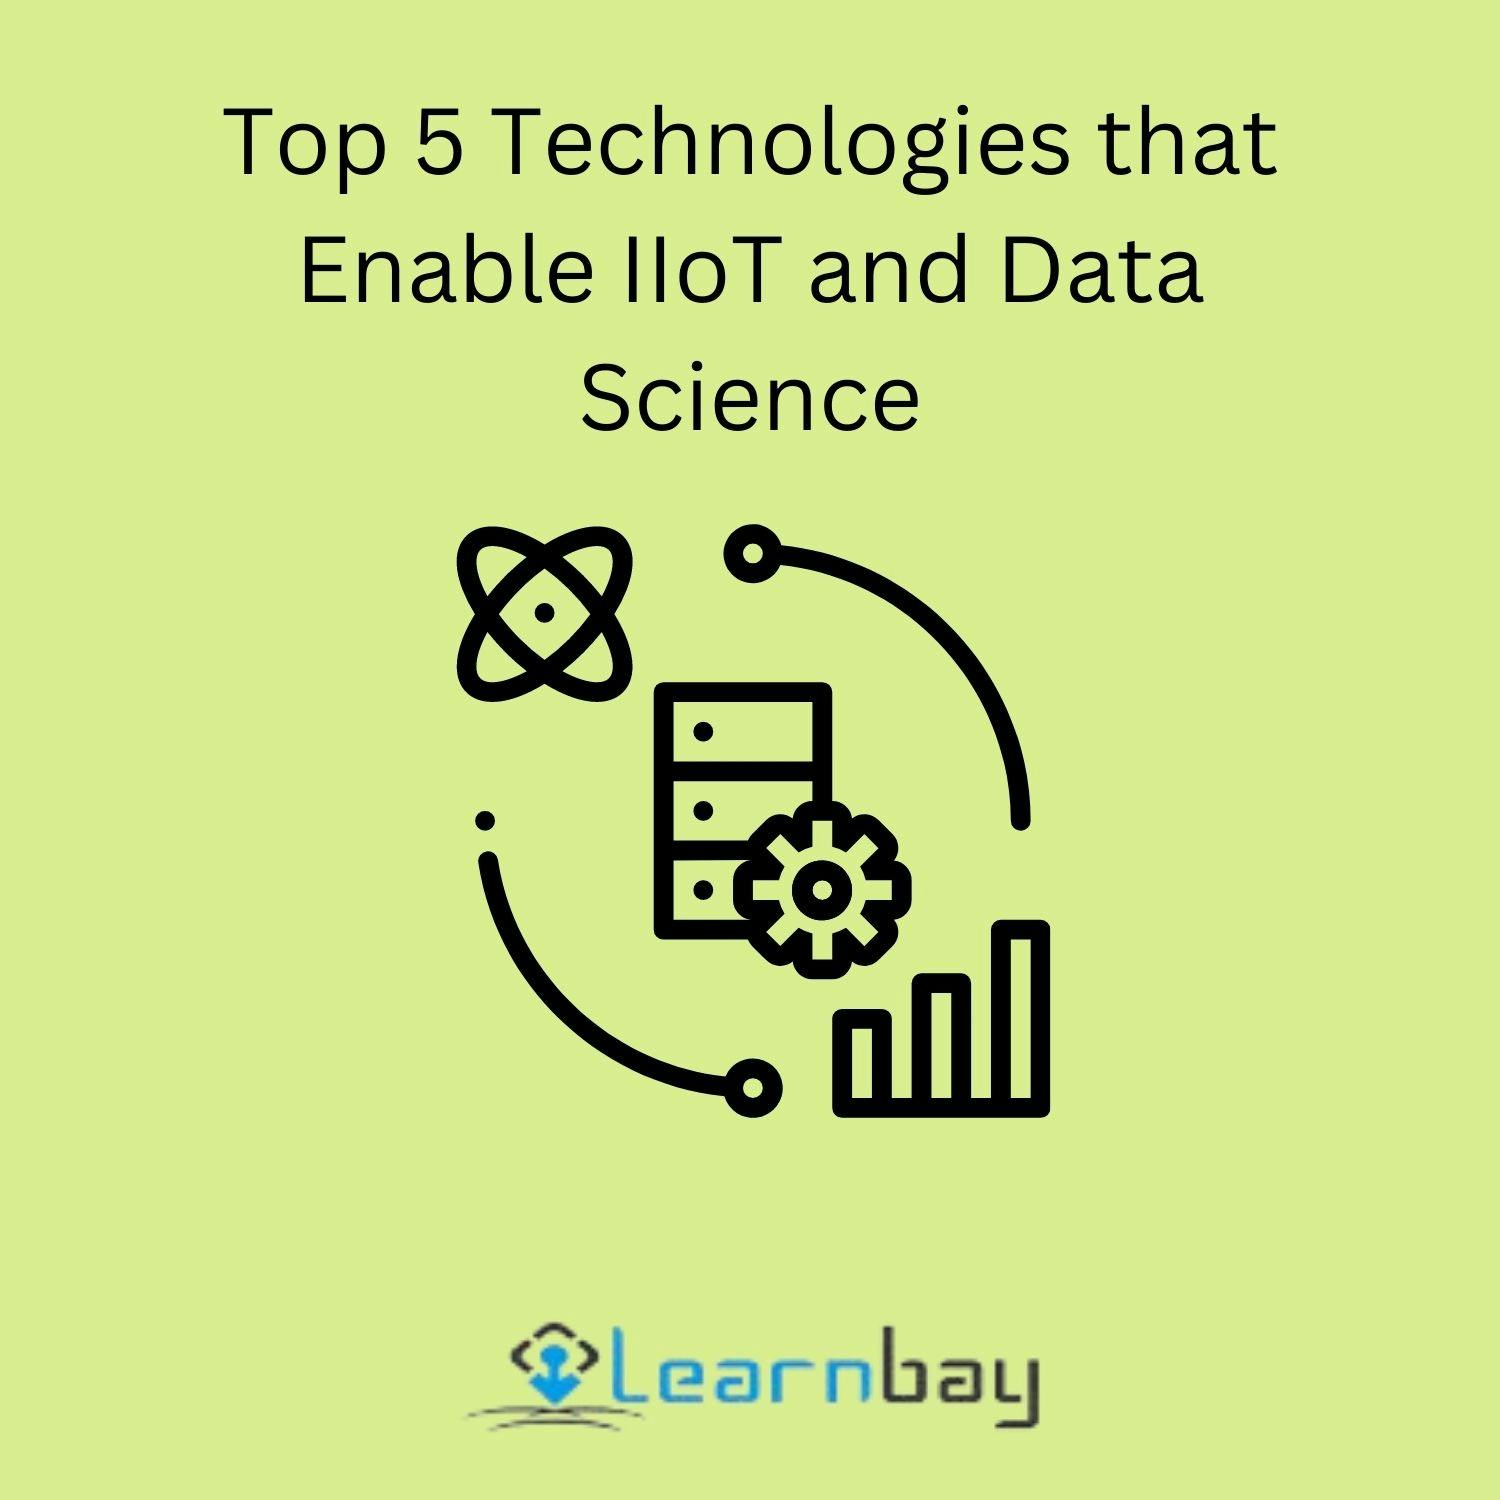 Top 5 Technologies that Enable IIoT and Data Science.jpg